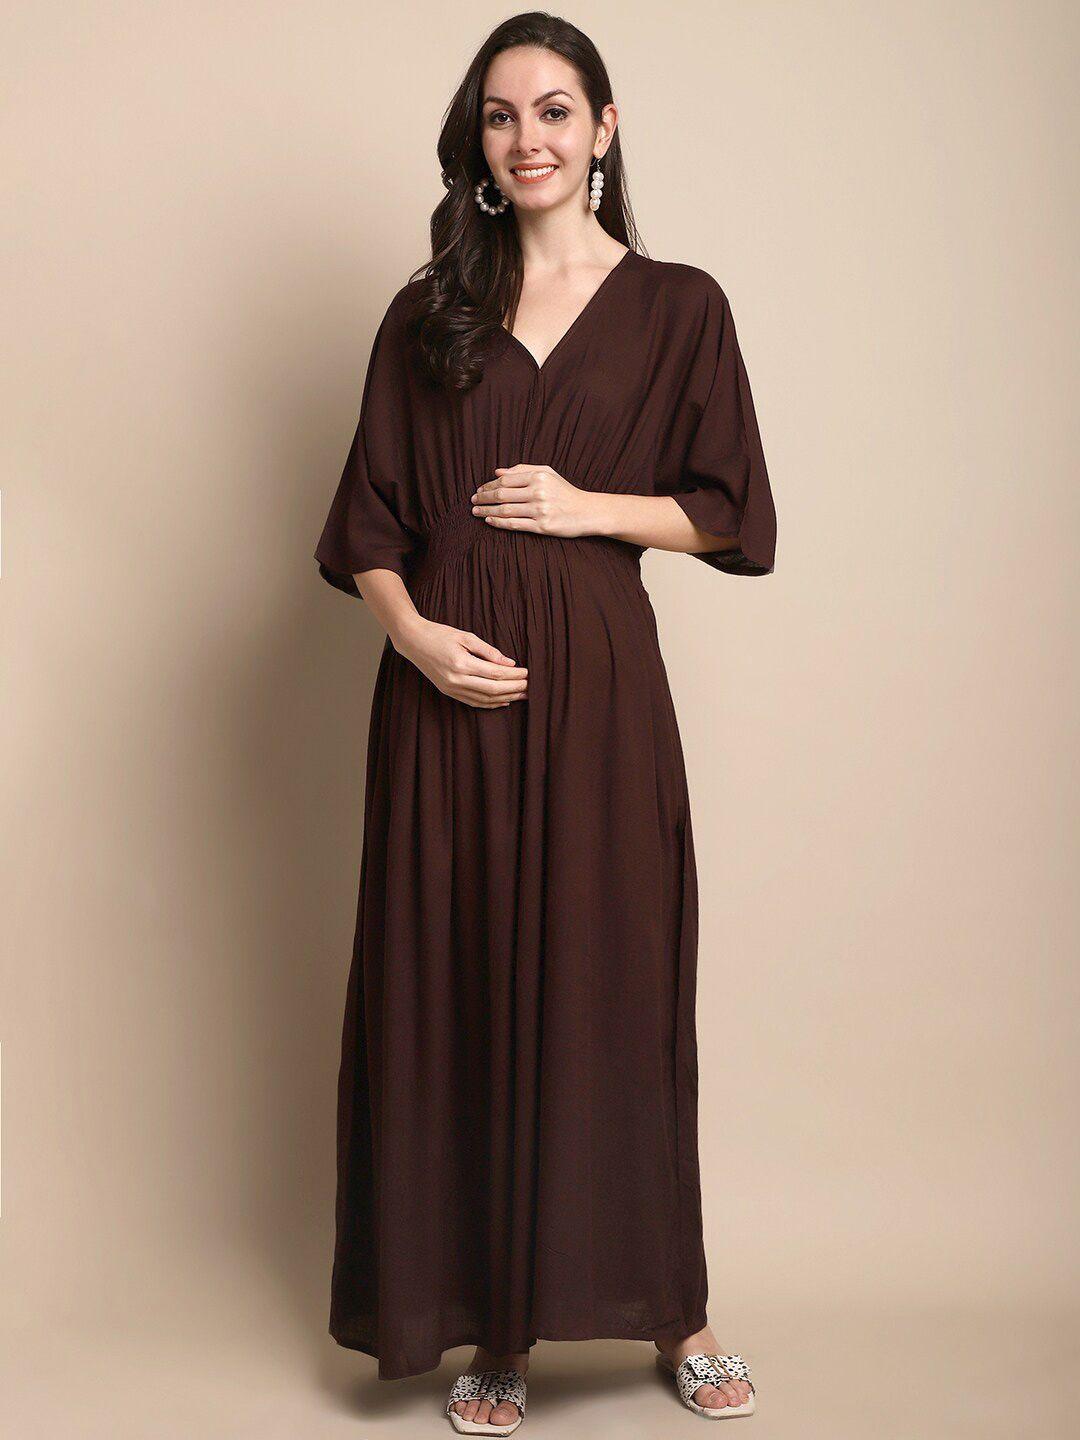 kalini v-neck extended sleeves smocked detail maternity fit and flare maxi dress